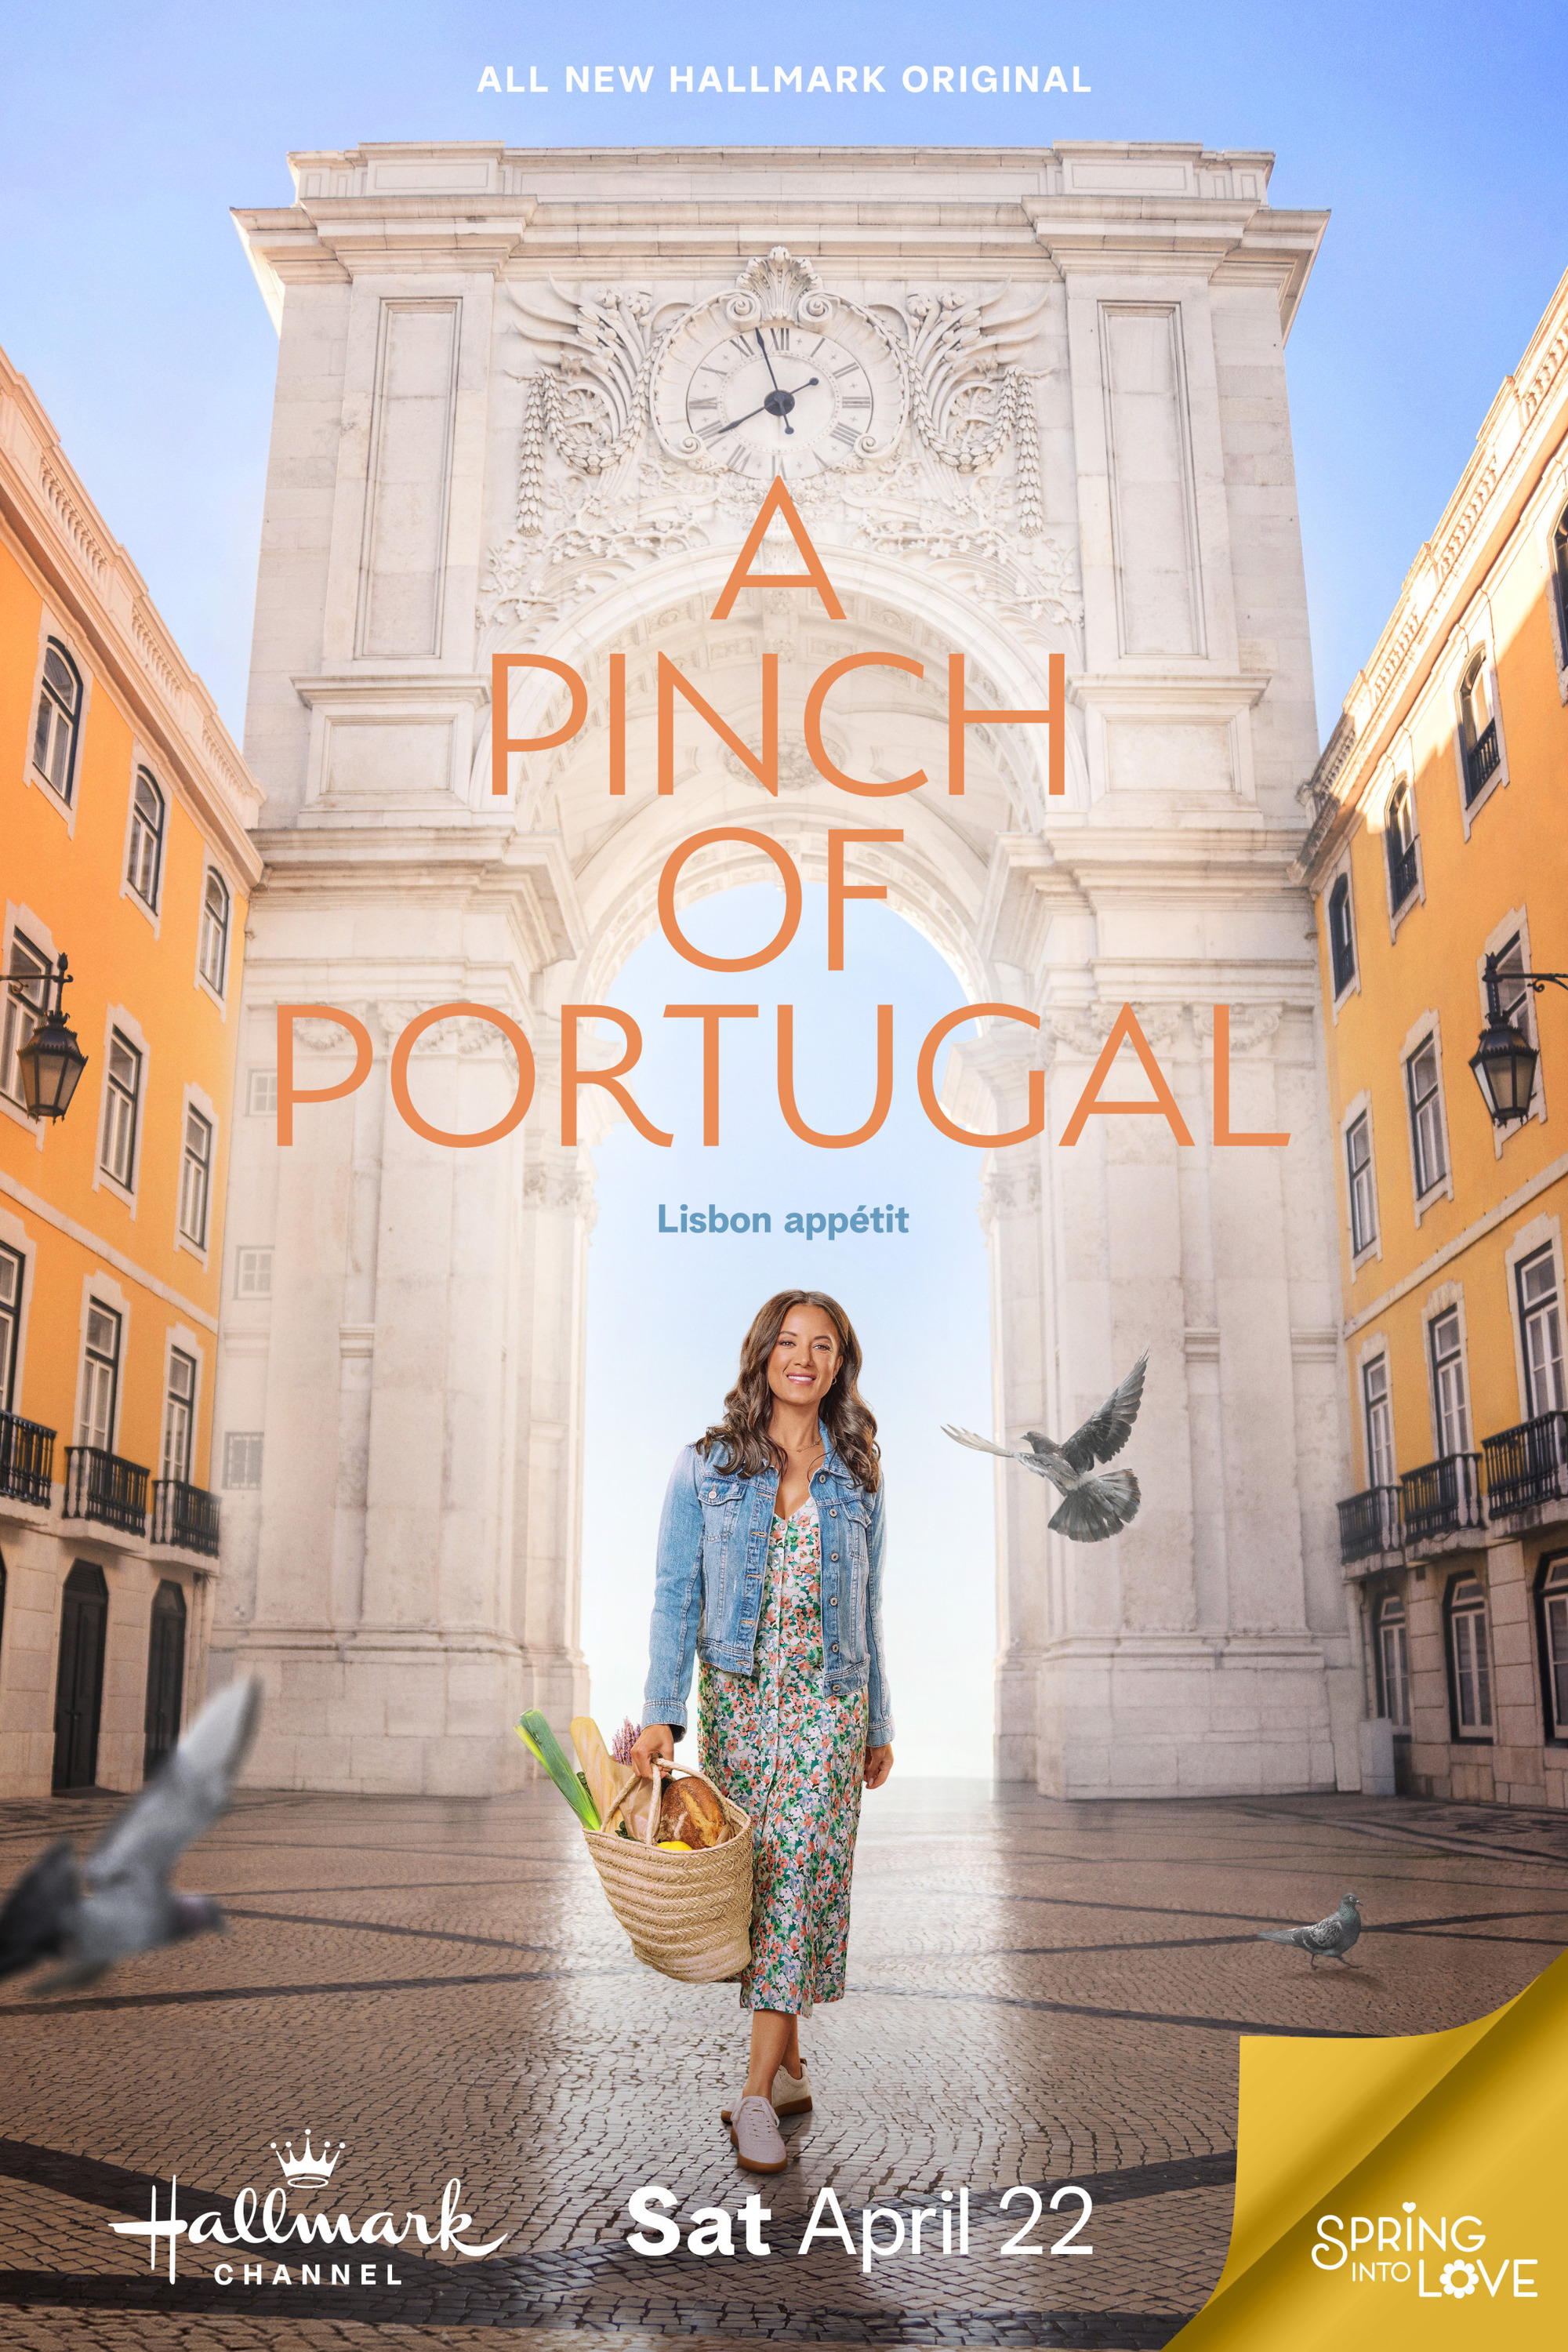 Mega Sized Movie Poster Image for A Pinch of Portugal 